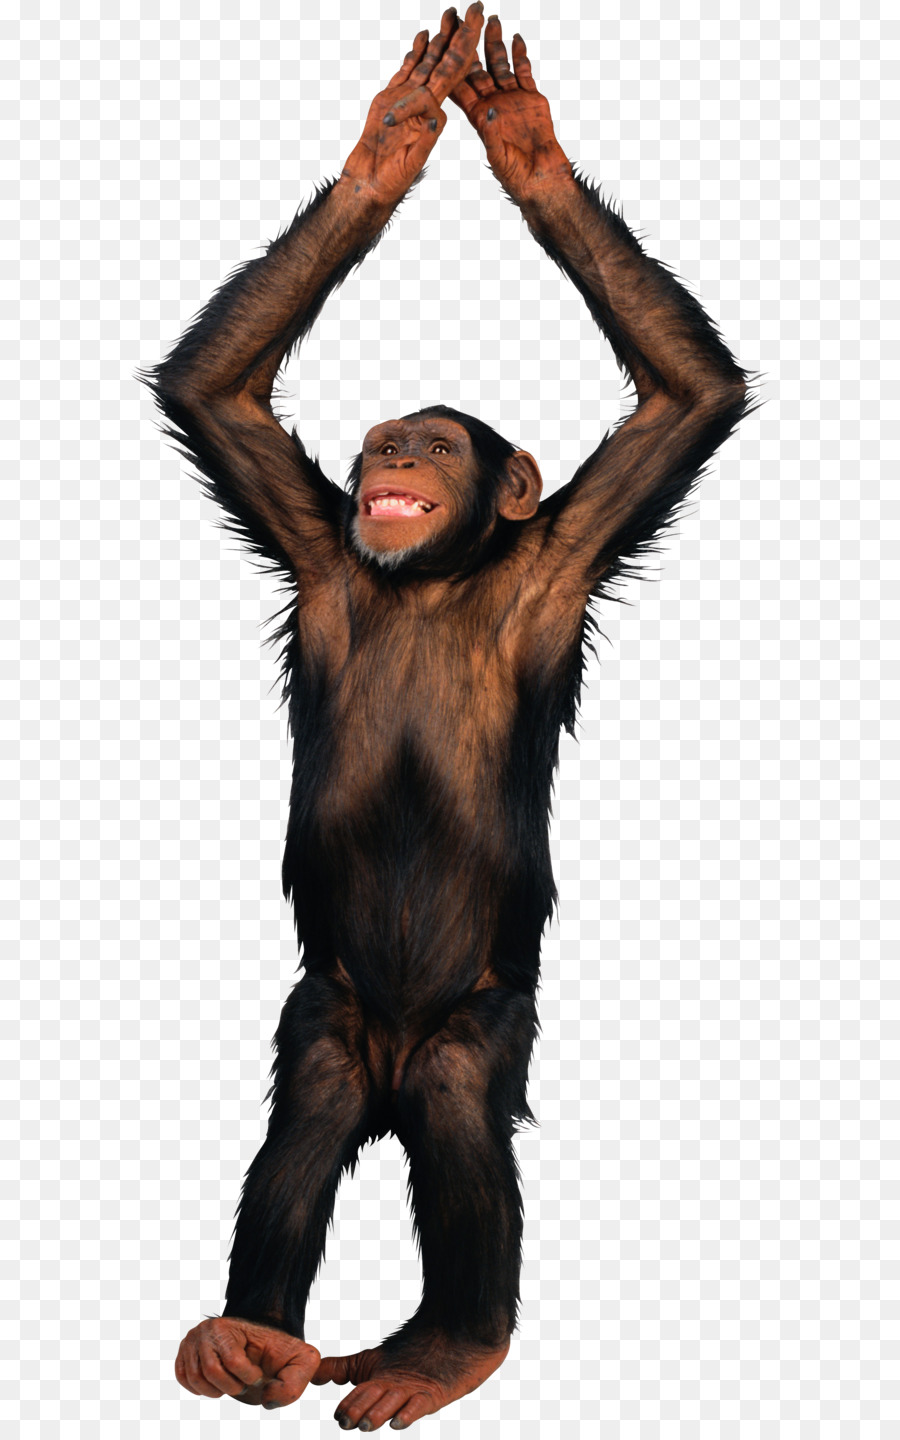 PicMonkey - Monkey PNG png download - 1567*3453 - Free Transparent Primate png Download.